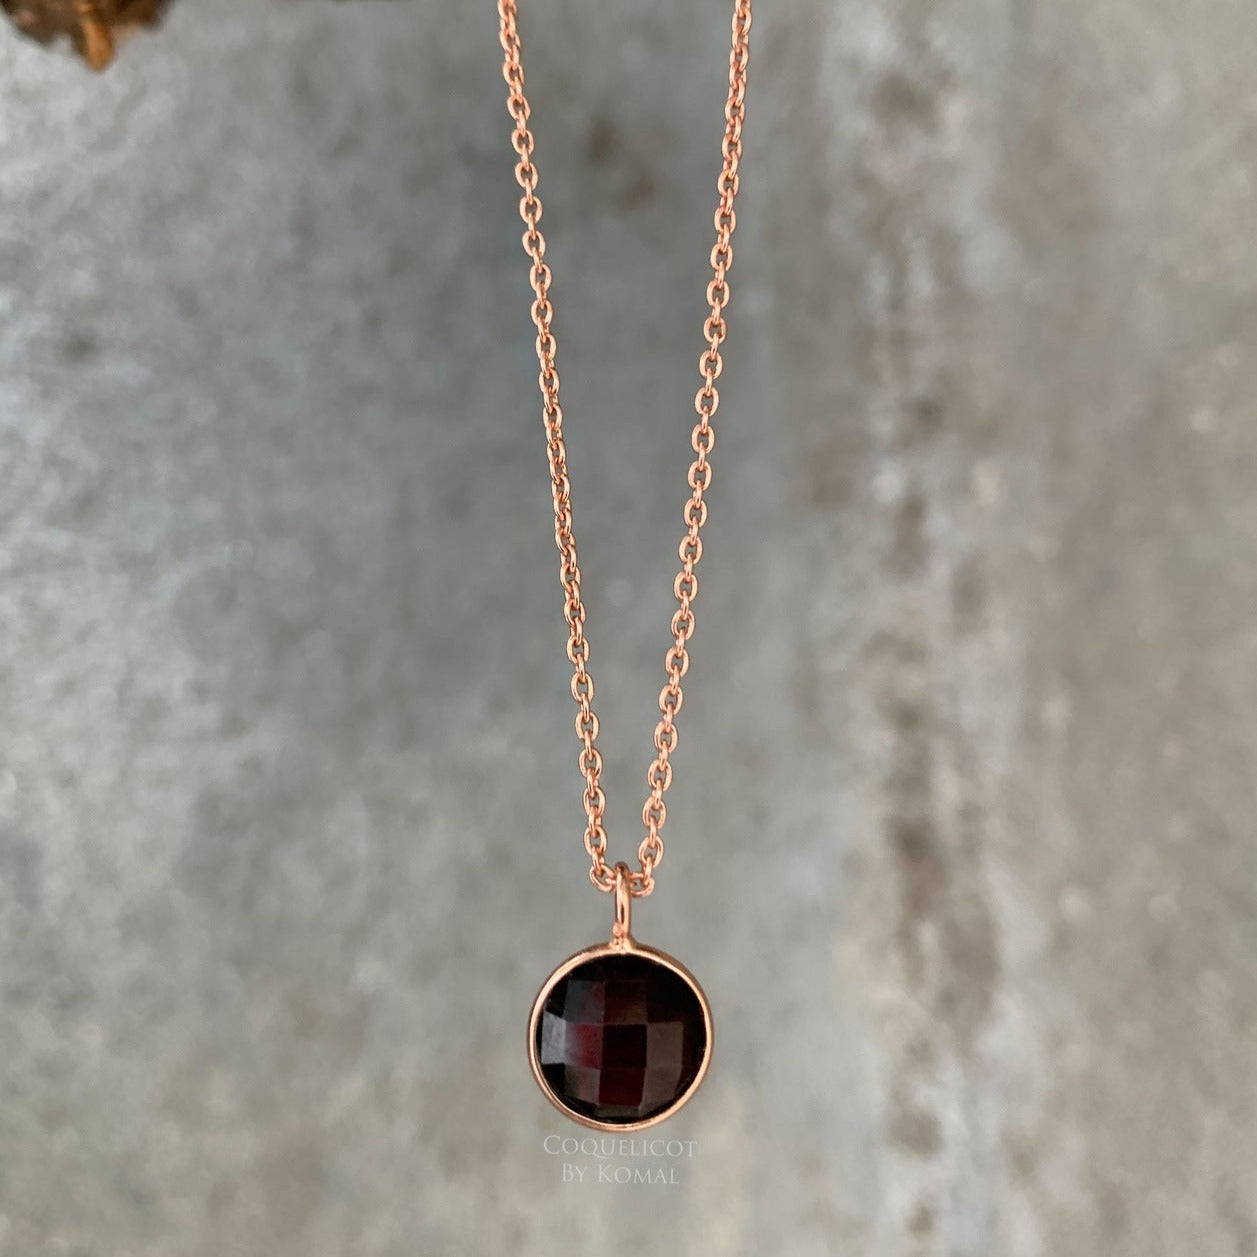 Garnet Necklace with 10mm round cut pendant, chain and fine Rose Gold polish. This dainty women's jewellery is a perfect spiritual and unique gift.